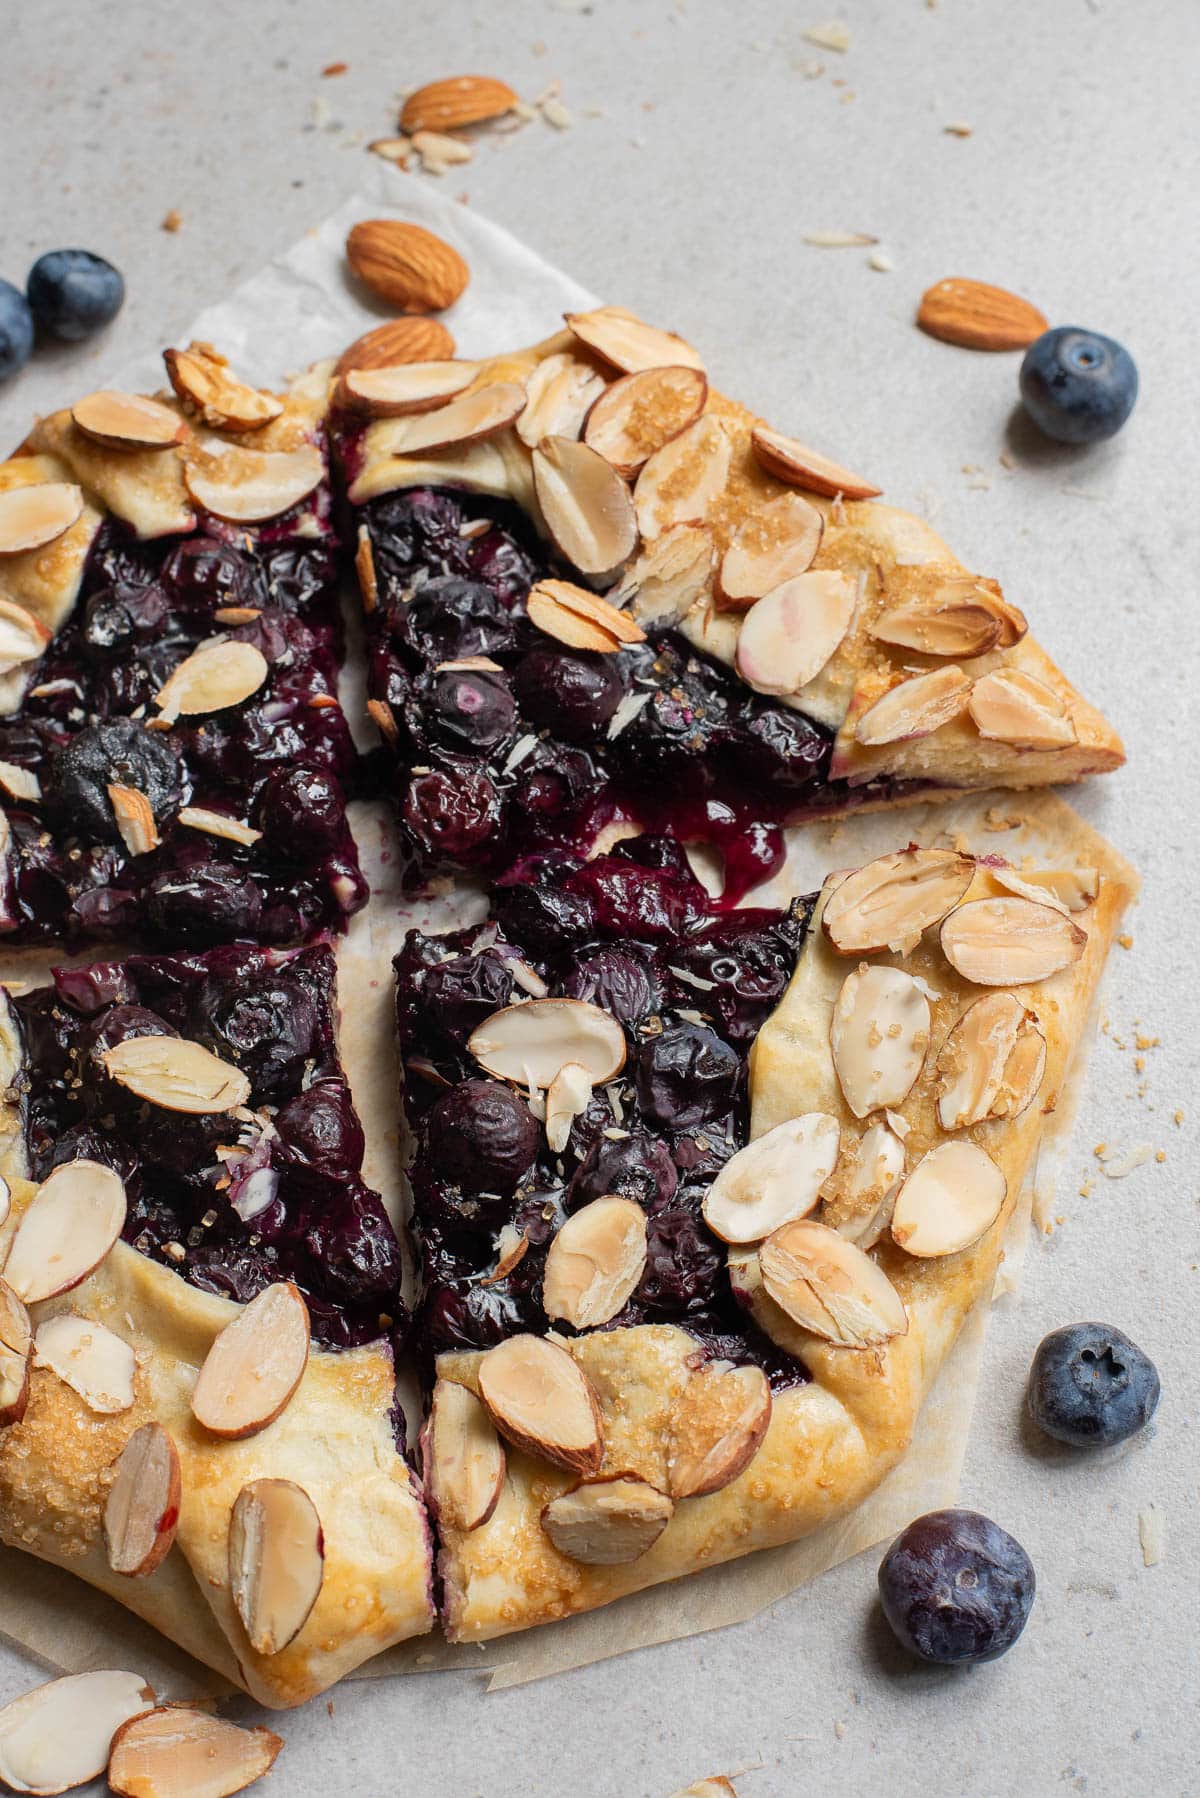 Baked blueberry galette cut in four pieces on parchment paper.